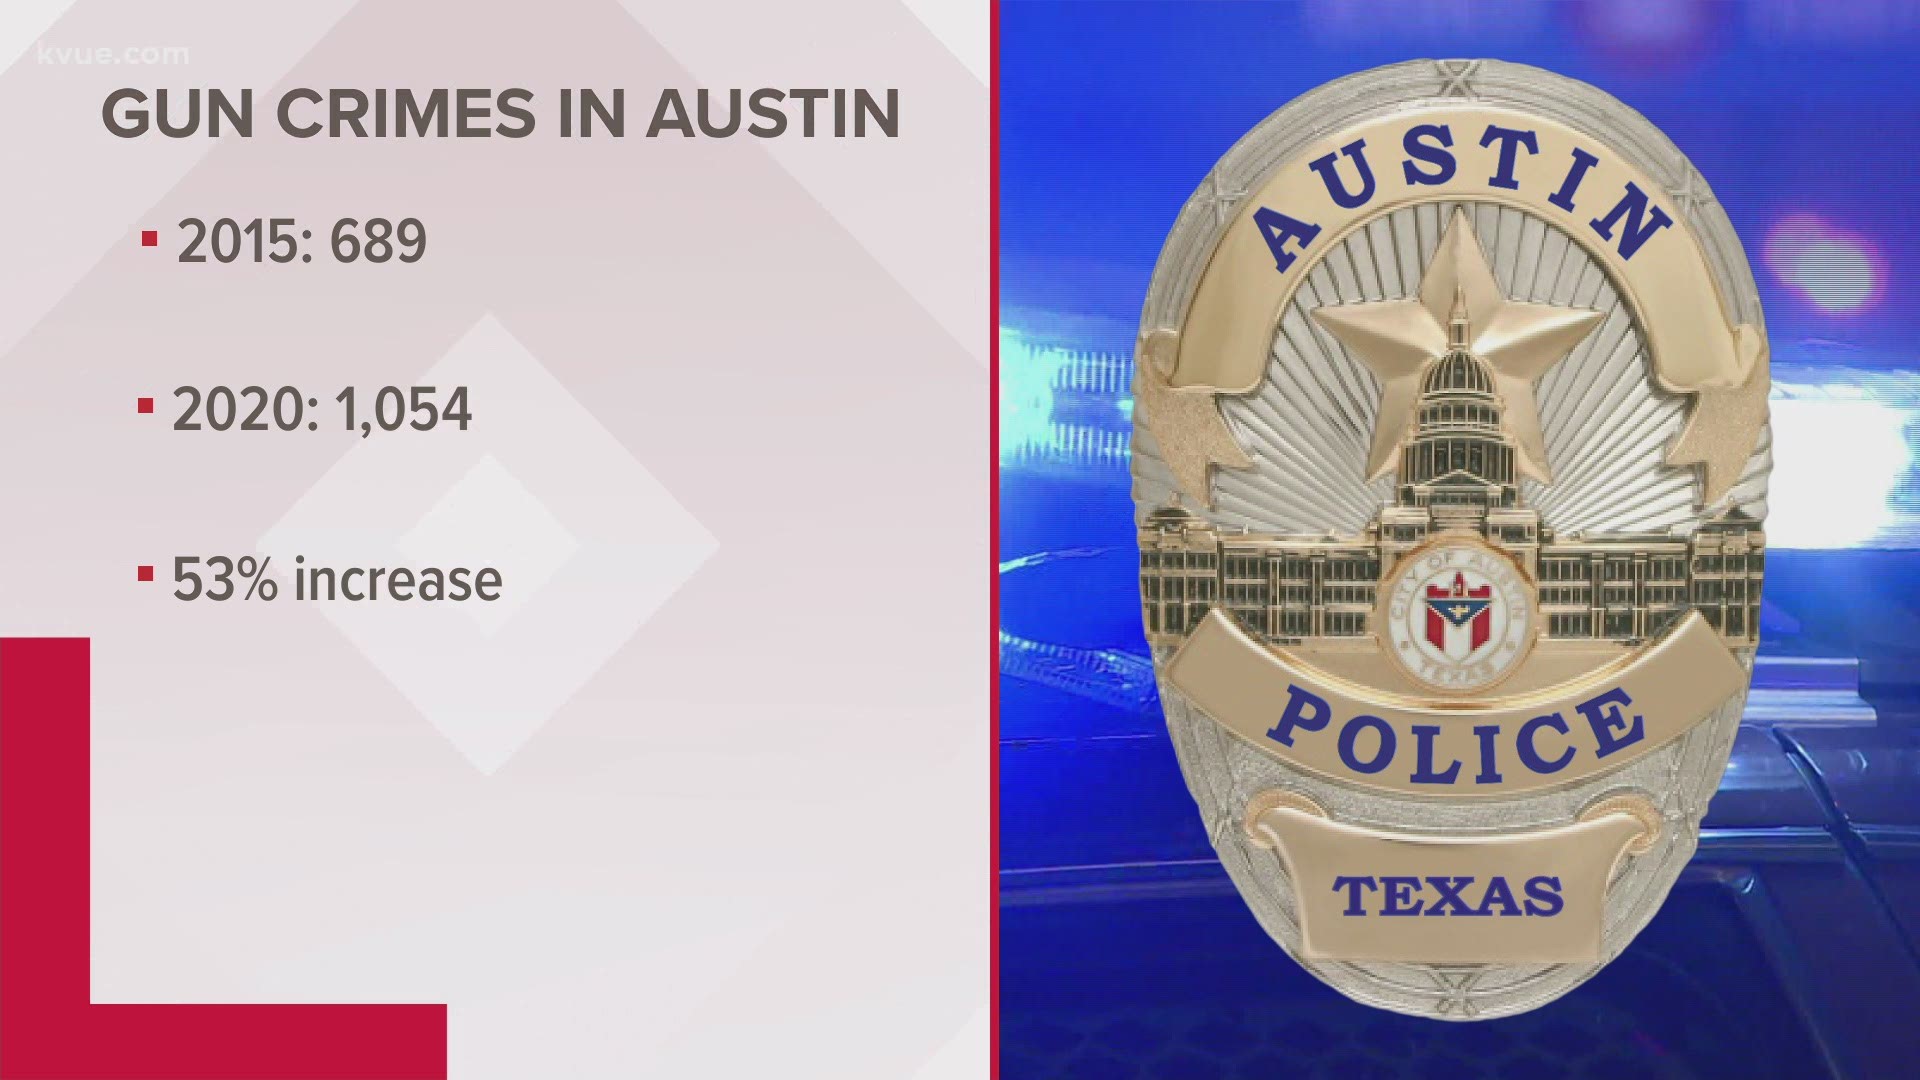 This morning's shooting is prompting heightened discussions about several ongoing community issues in Austin, including gun violence and public safety.